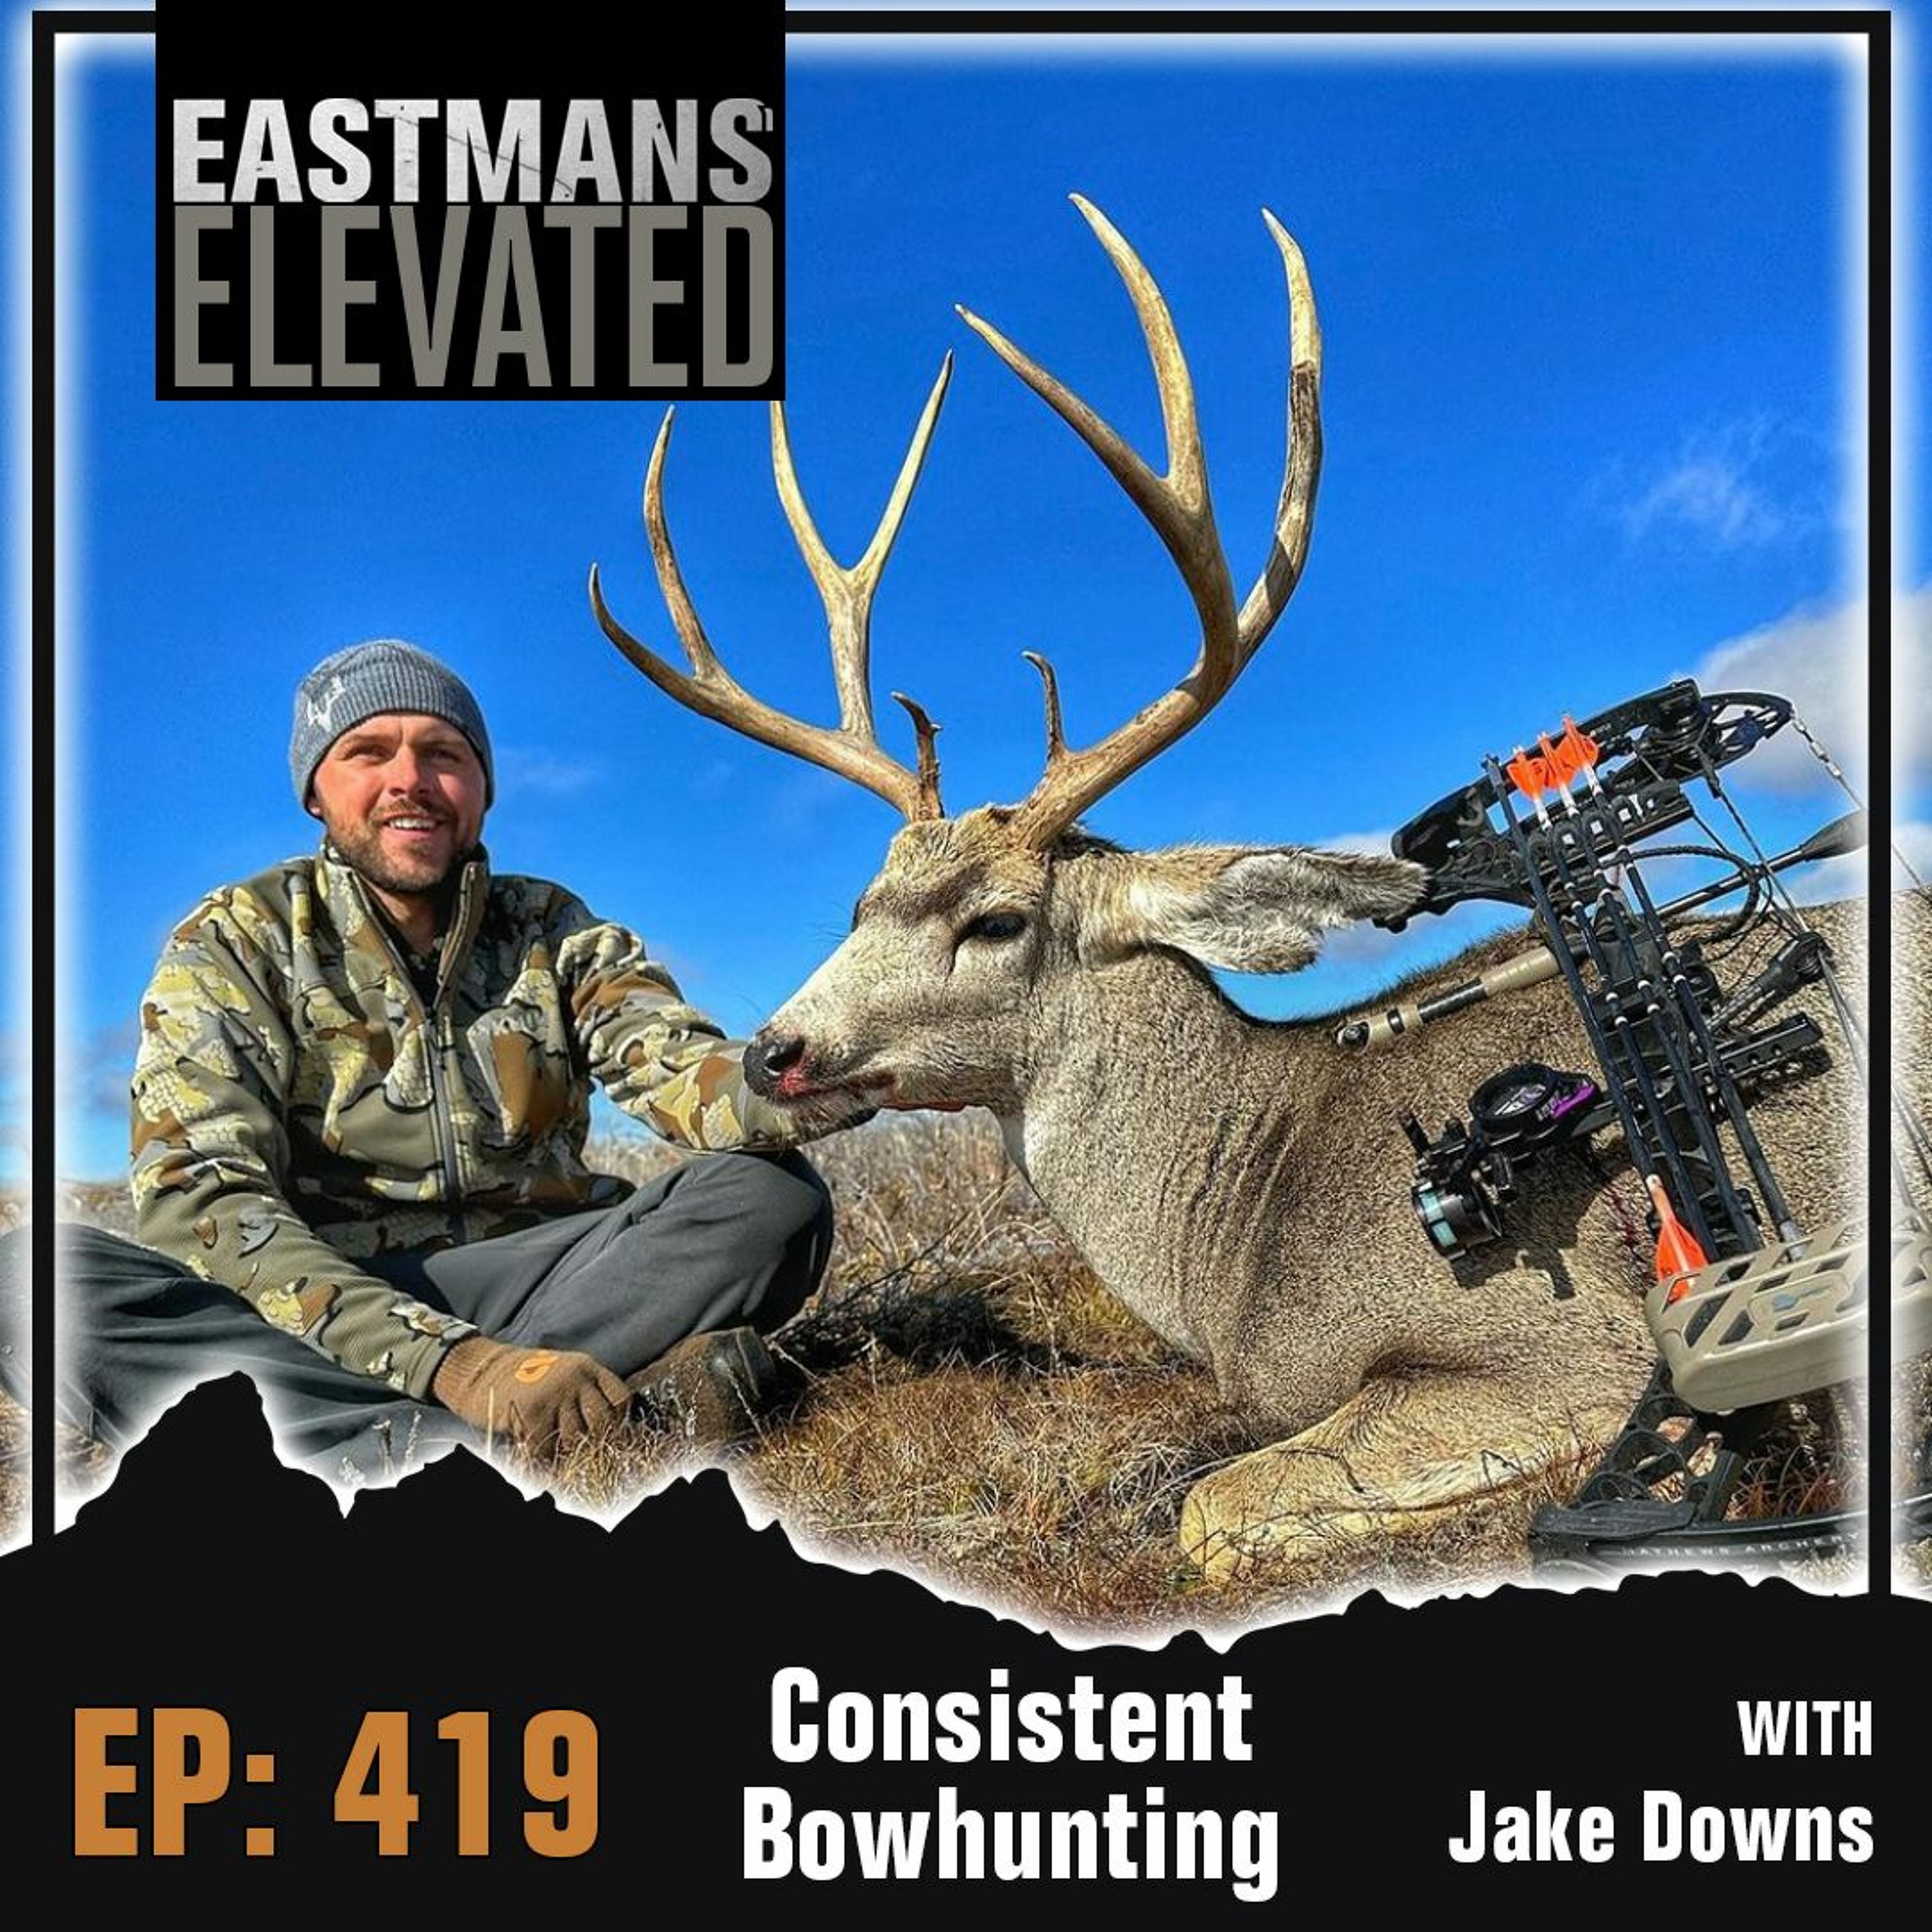 Episode 419: Consistent Bowhunting With Jake Downs